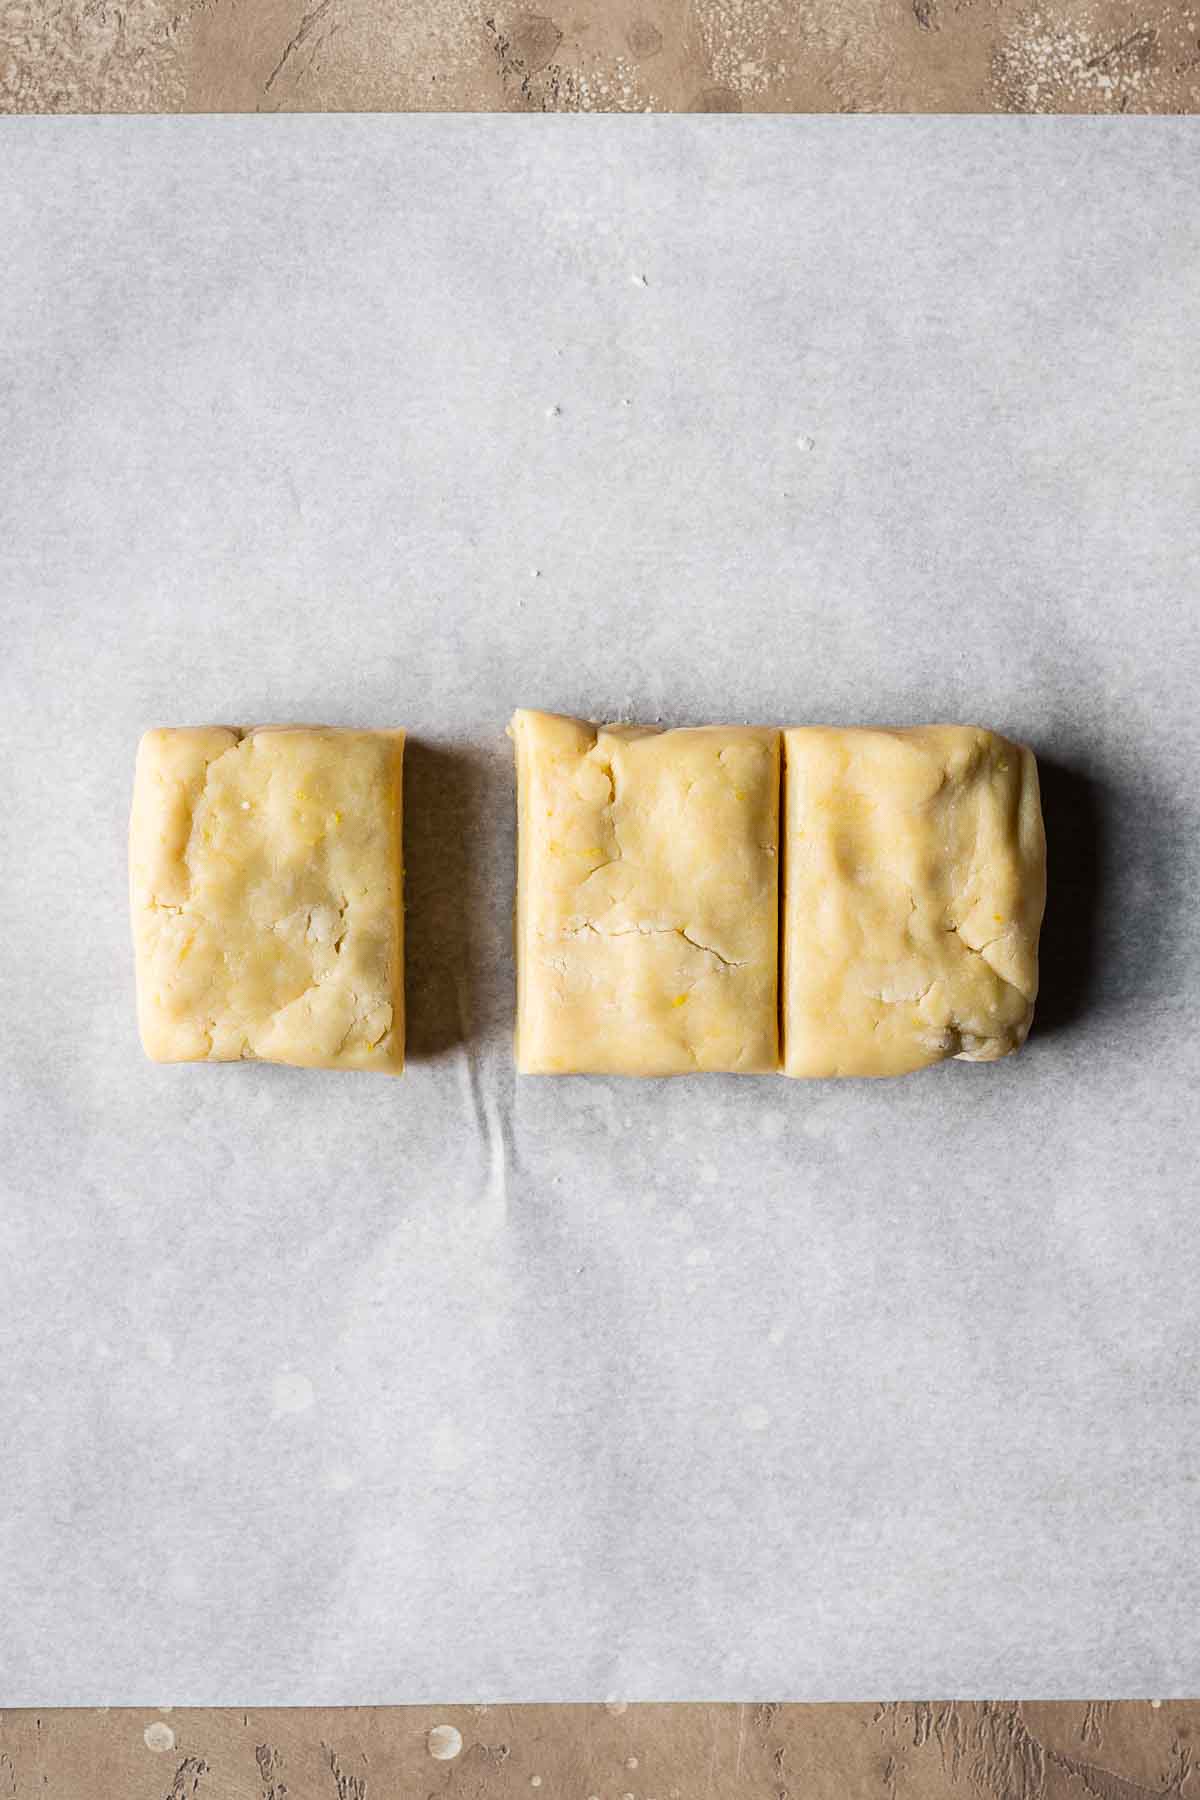 Shortcrust pastry dough divided into thirds on parchment paper.